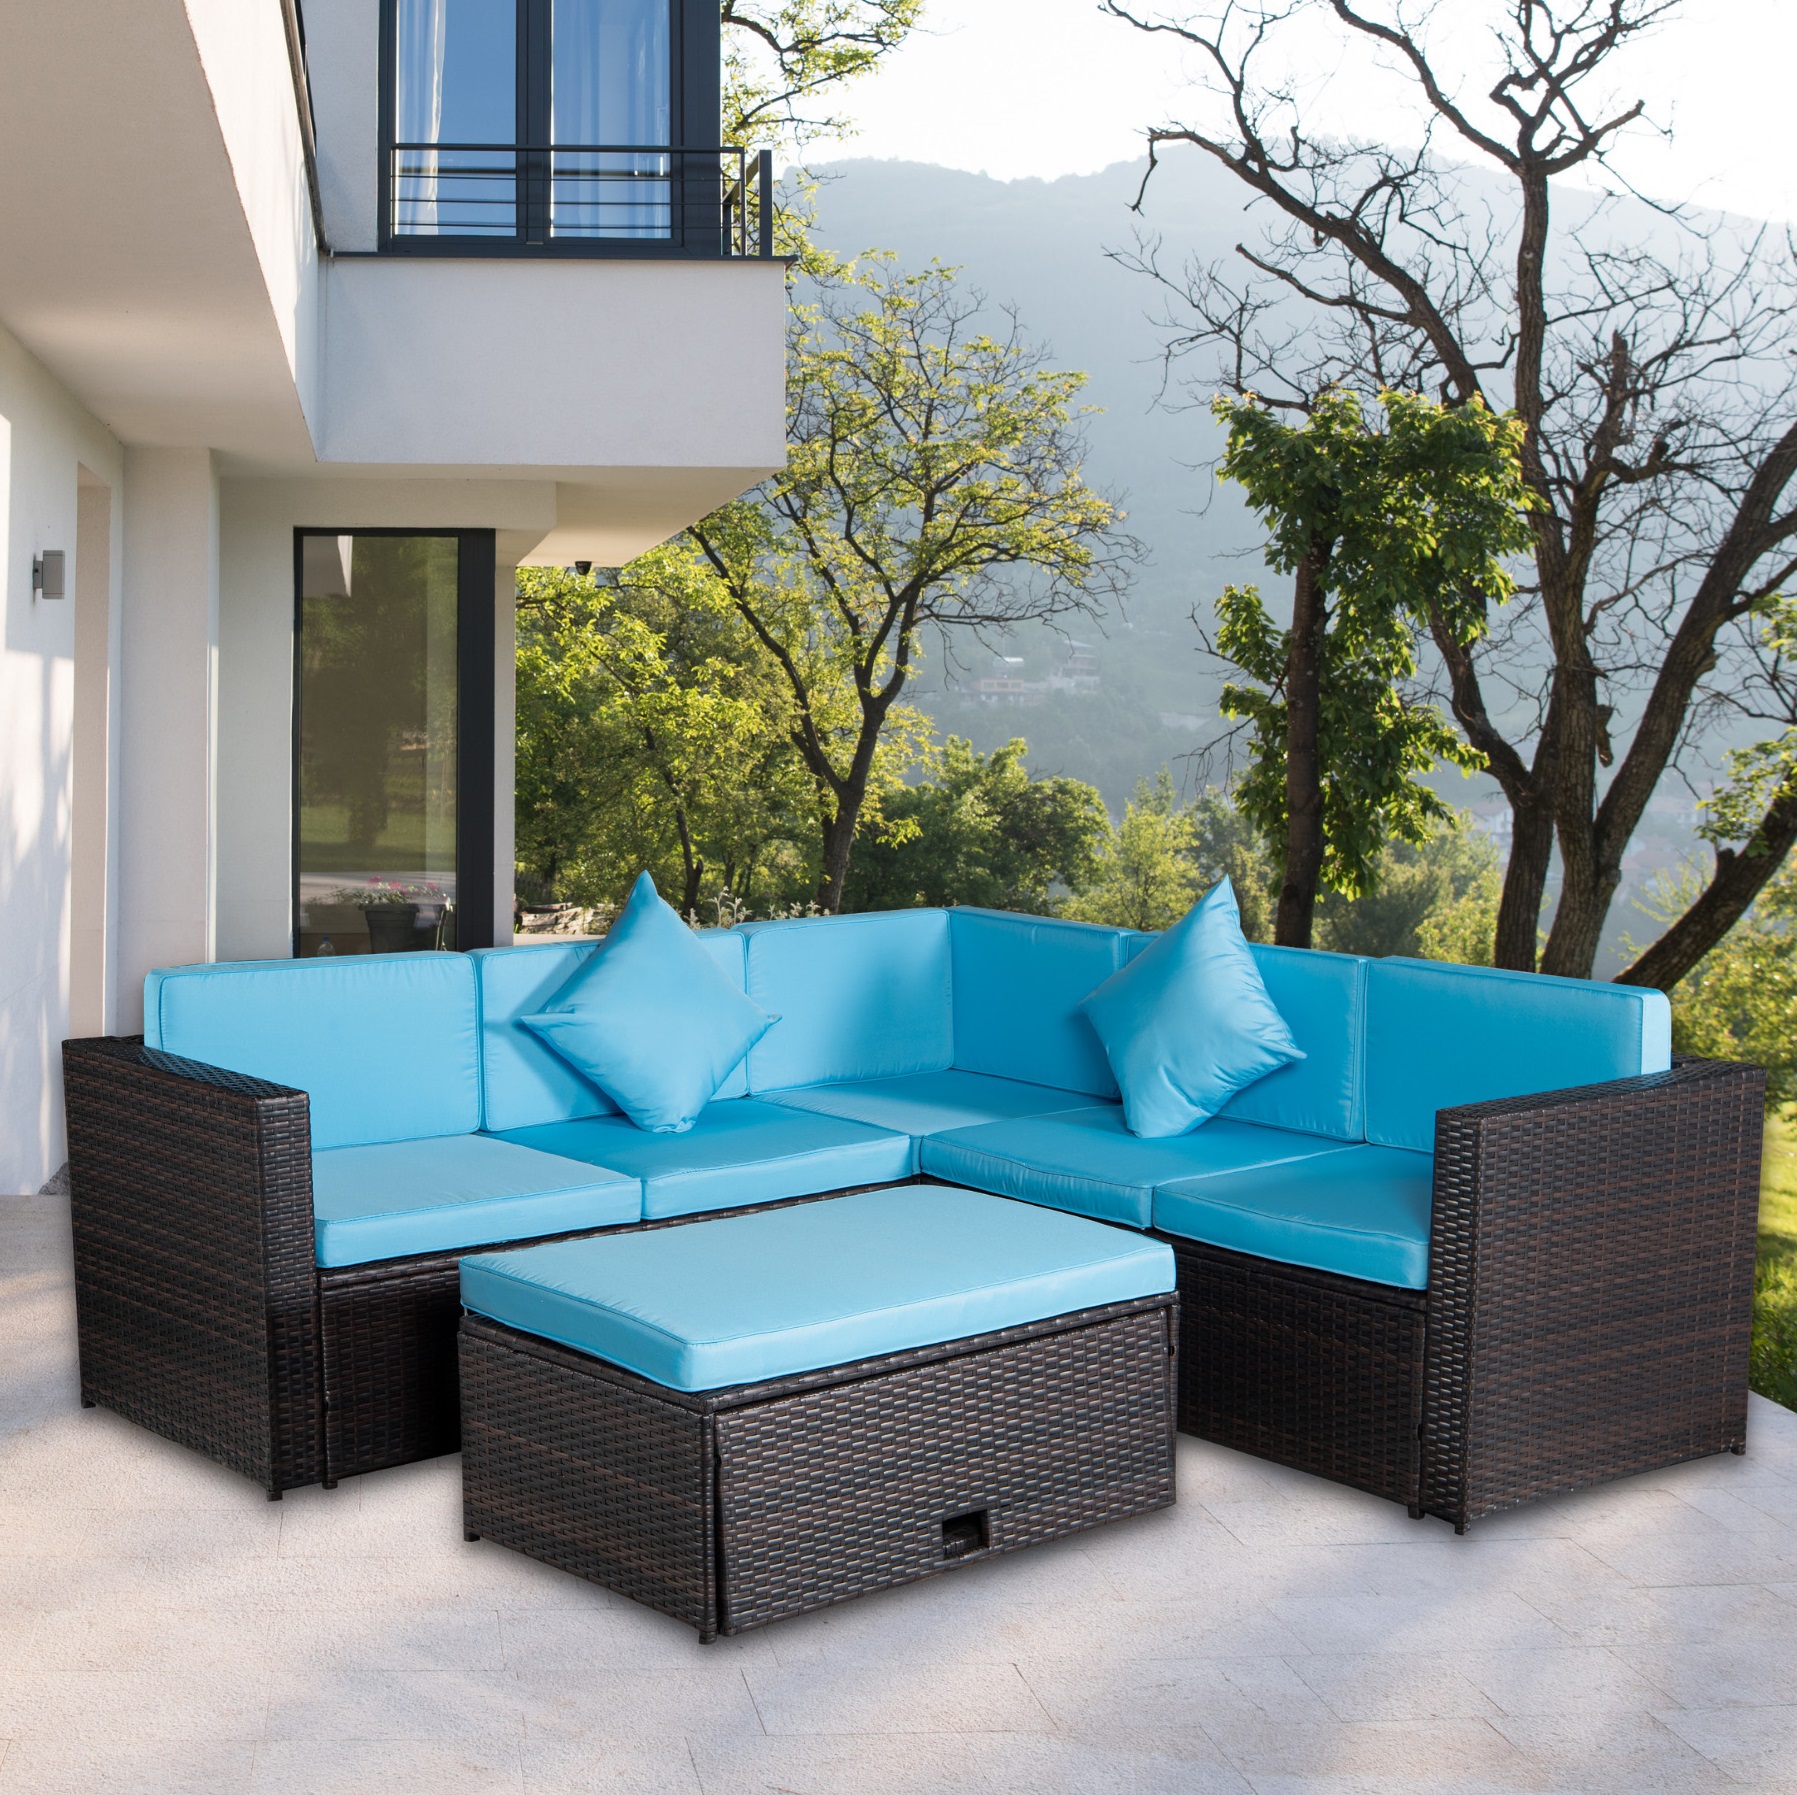 Outdoor Furniture Sets Sofa Sets, 4 PCS Conversation Sets Sectional Furniture Set with 2 Loveseat, Corner Chair, and Wicker Table for Garden Poolside Deck, LJ3267 - image 1 of 11